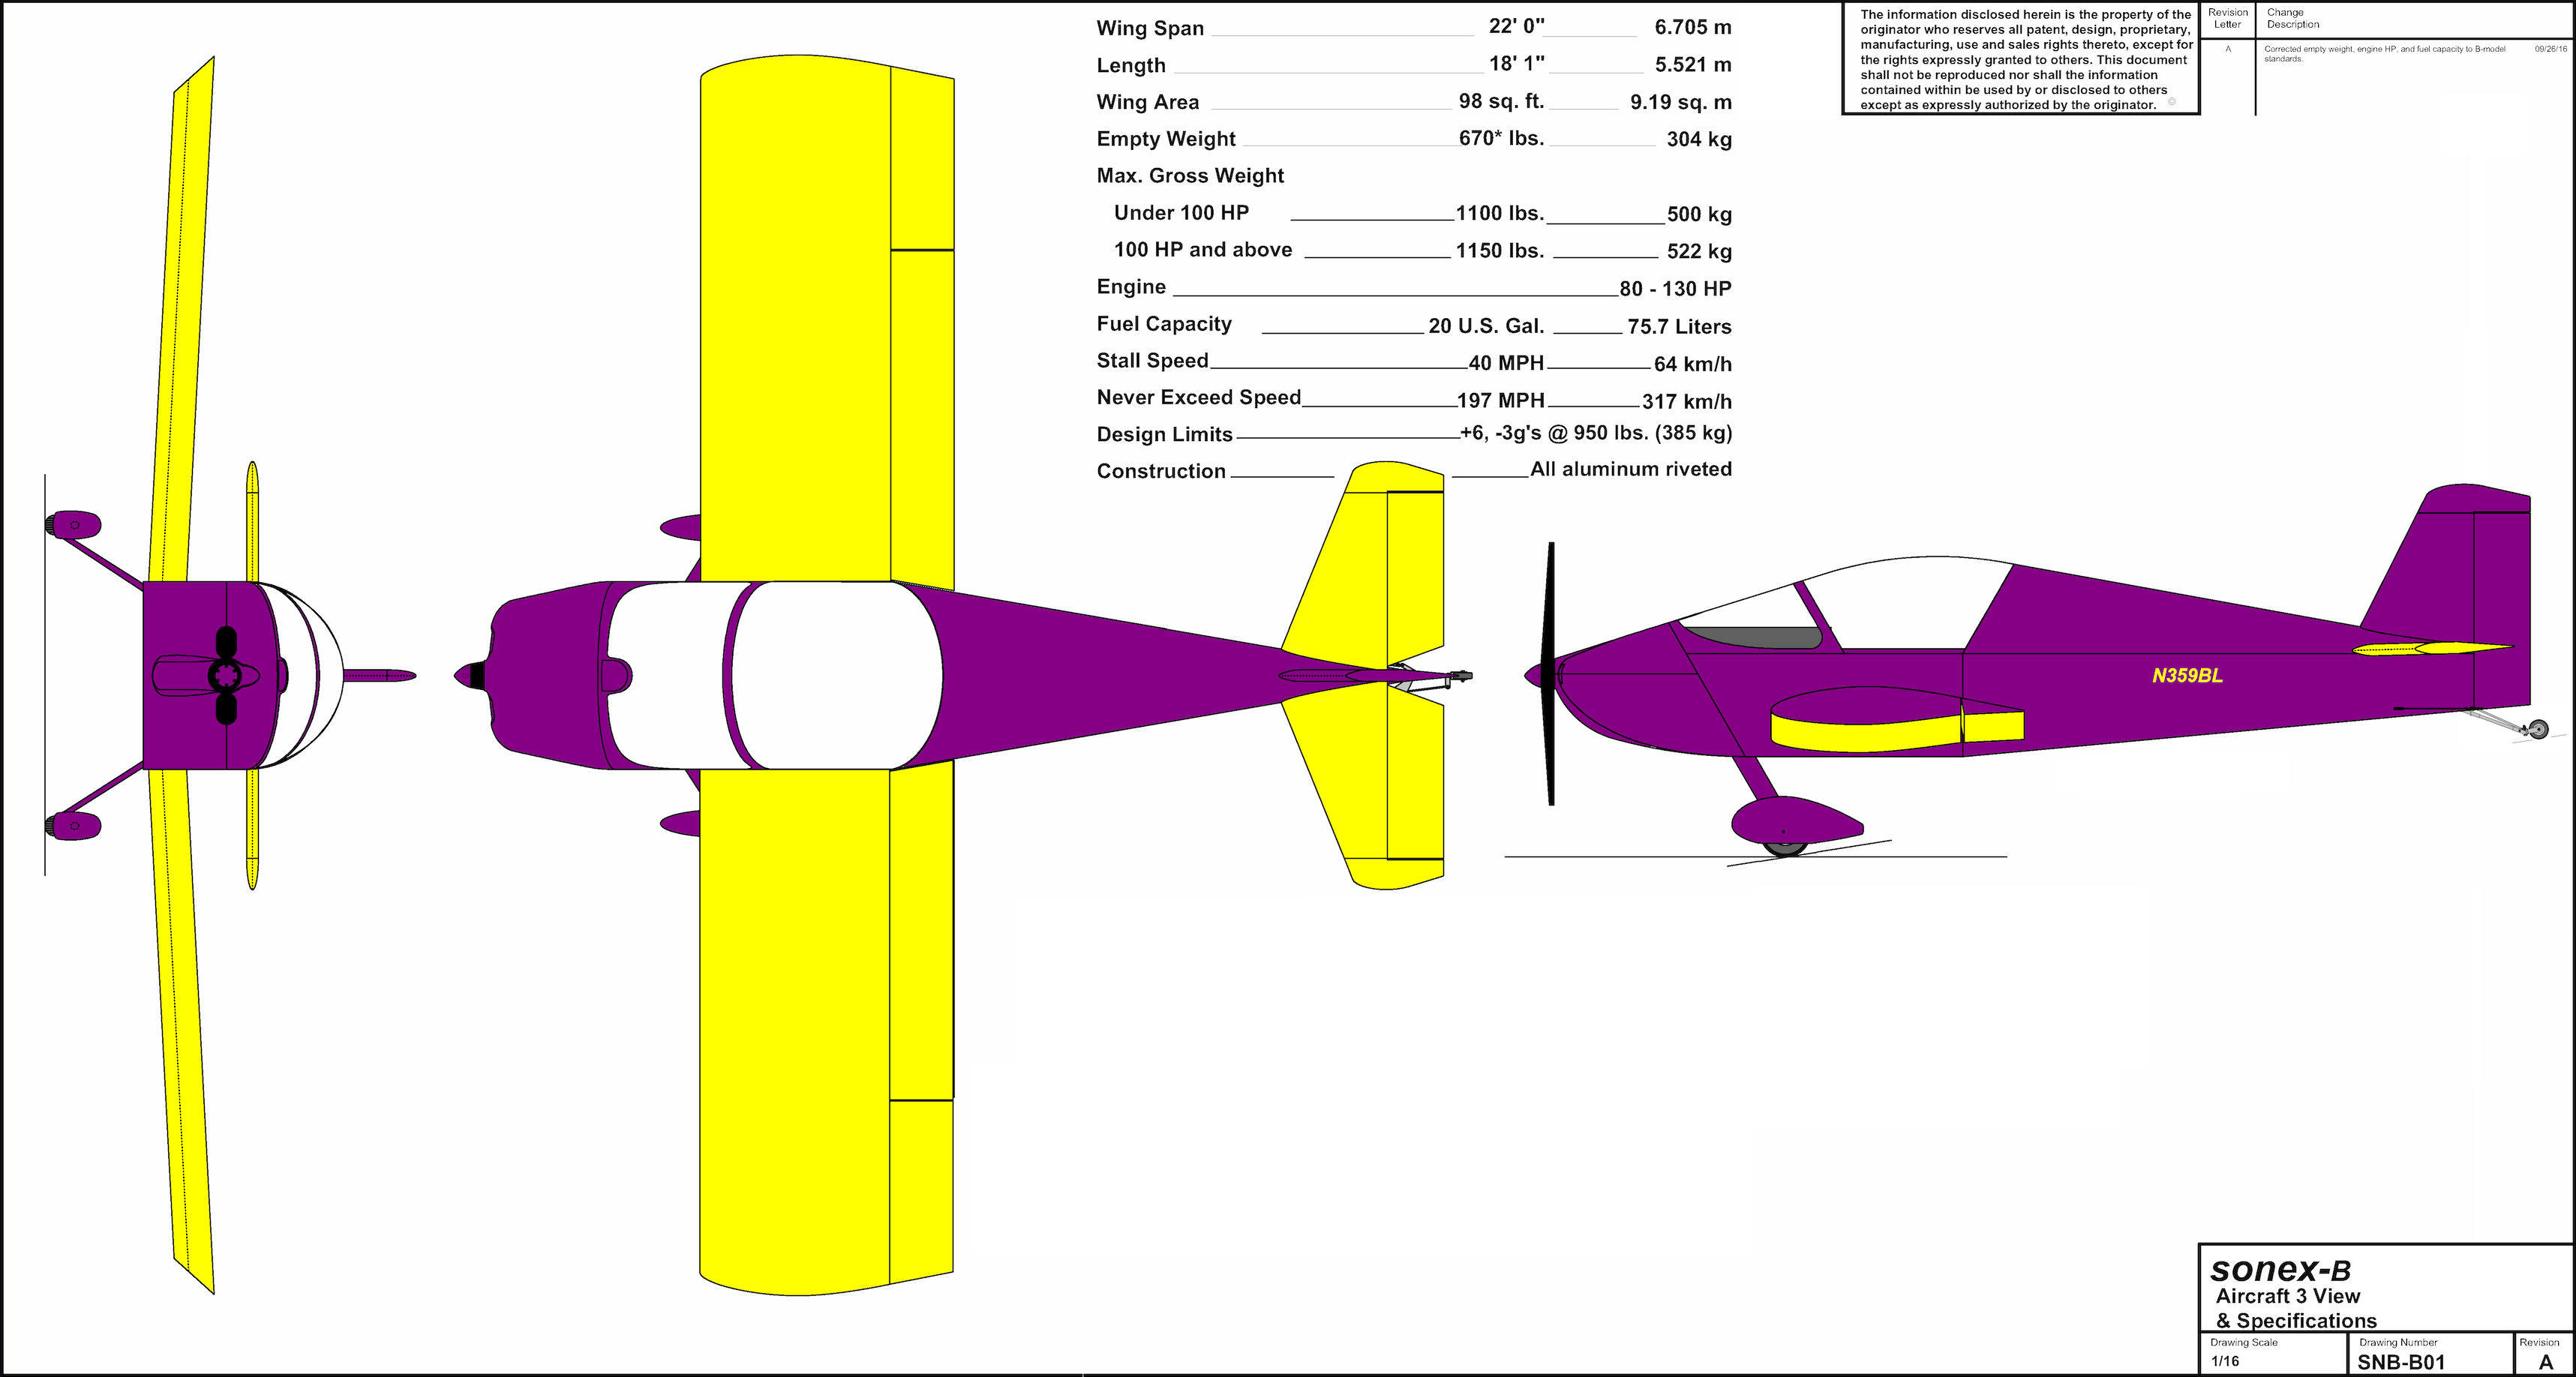 Sonex-B Aircraft 3 View & Specifications (N359BL)